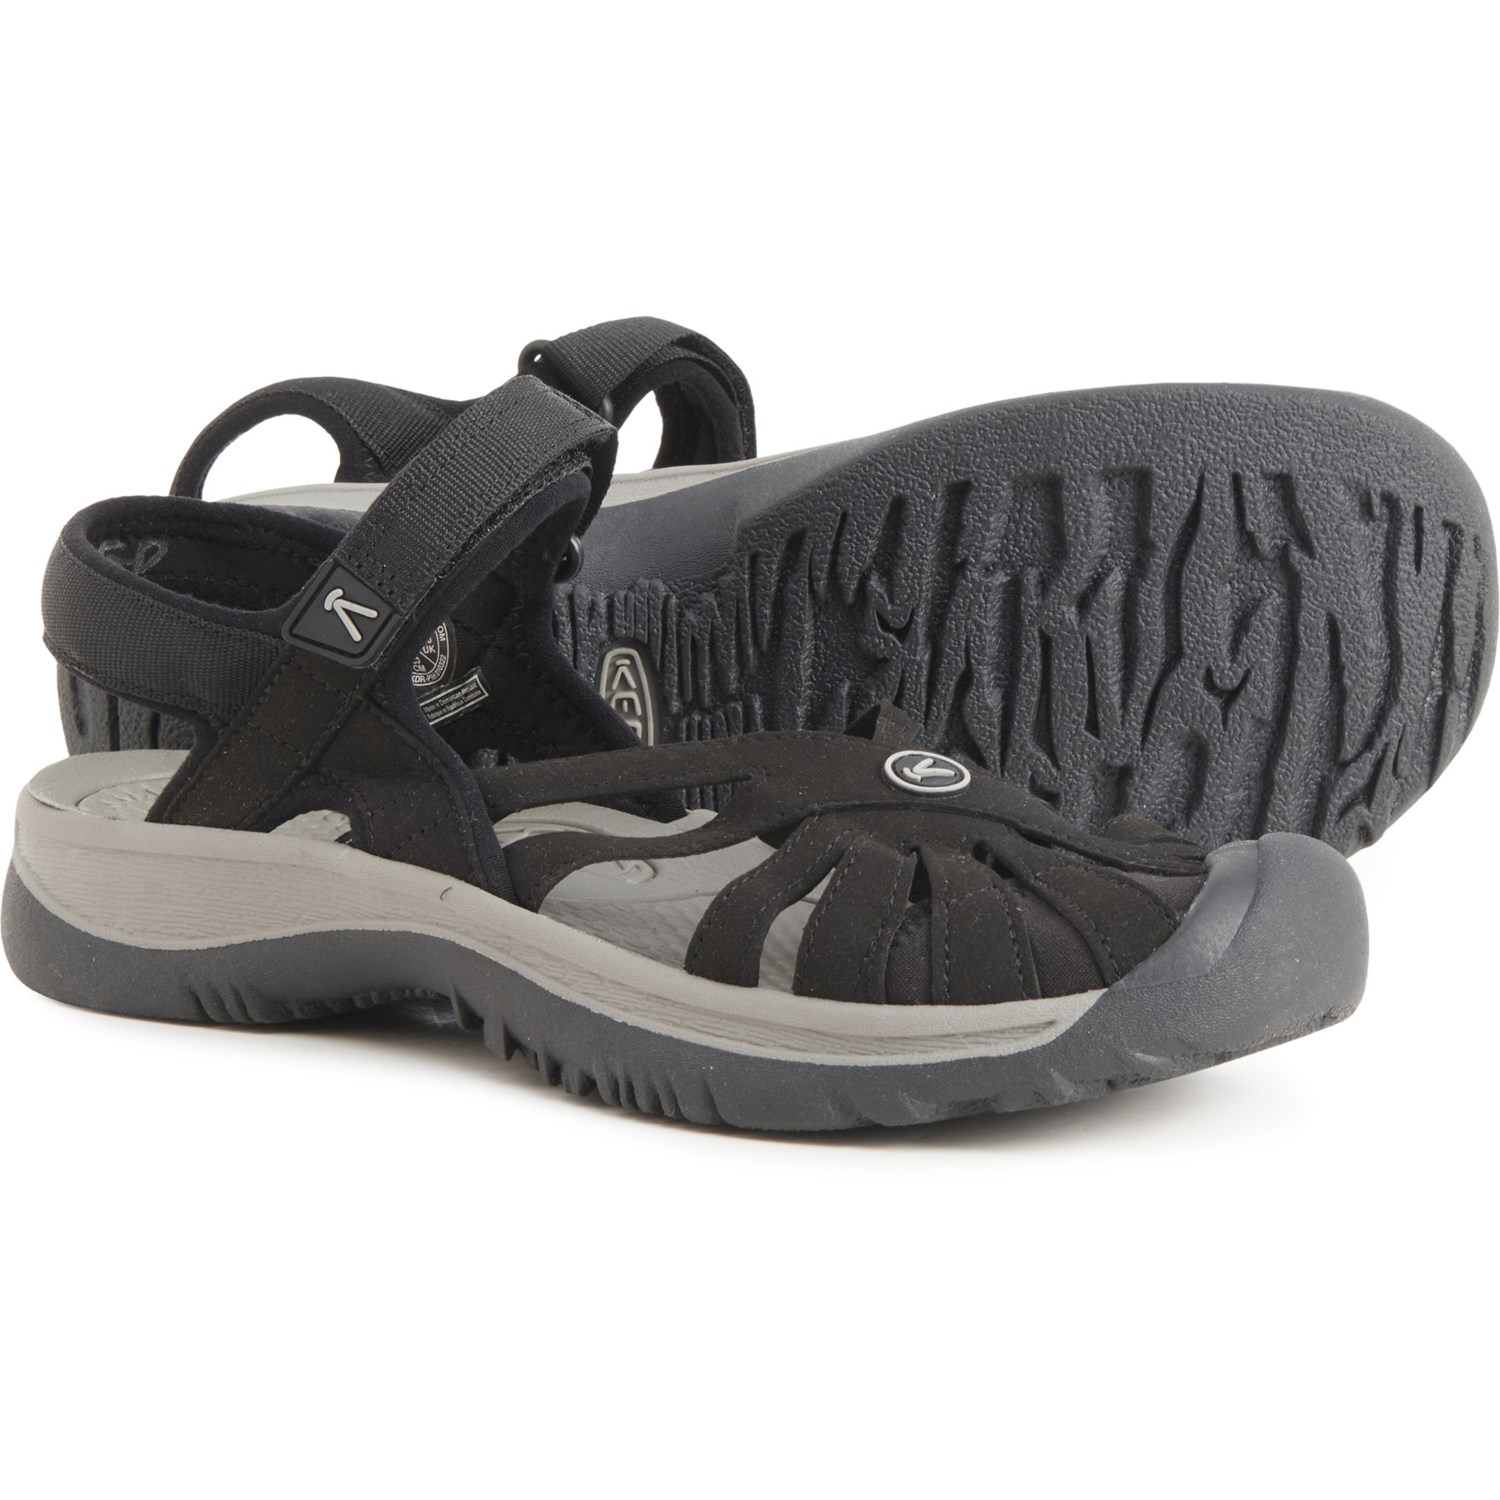 Keen Rose Sandals (For Women) - Save 27%